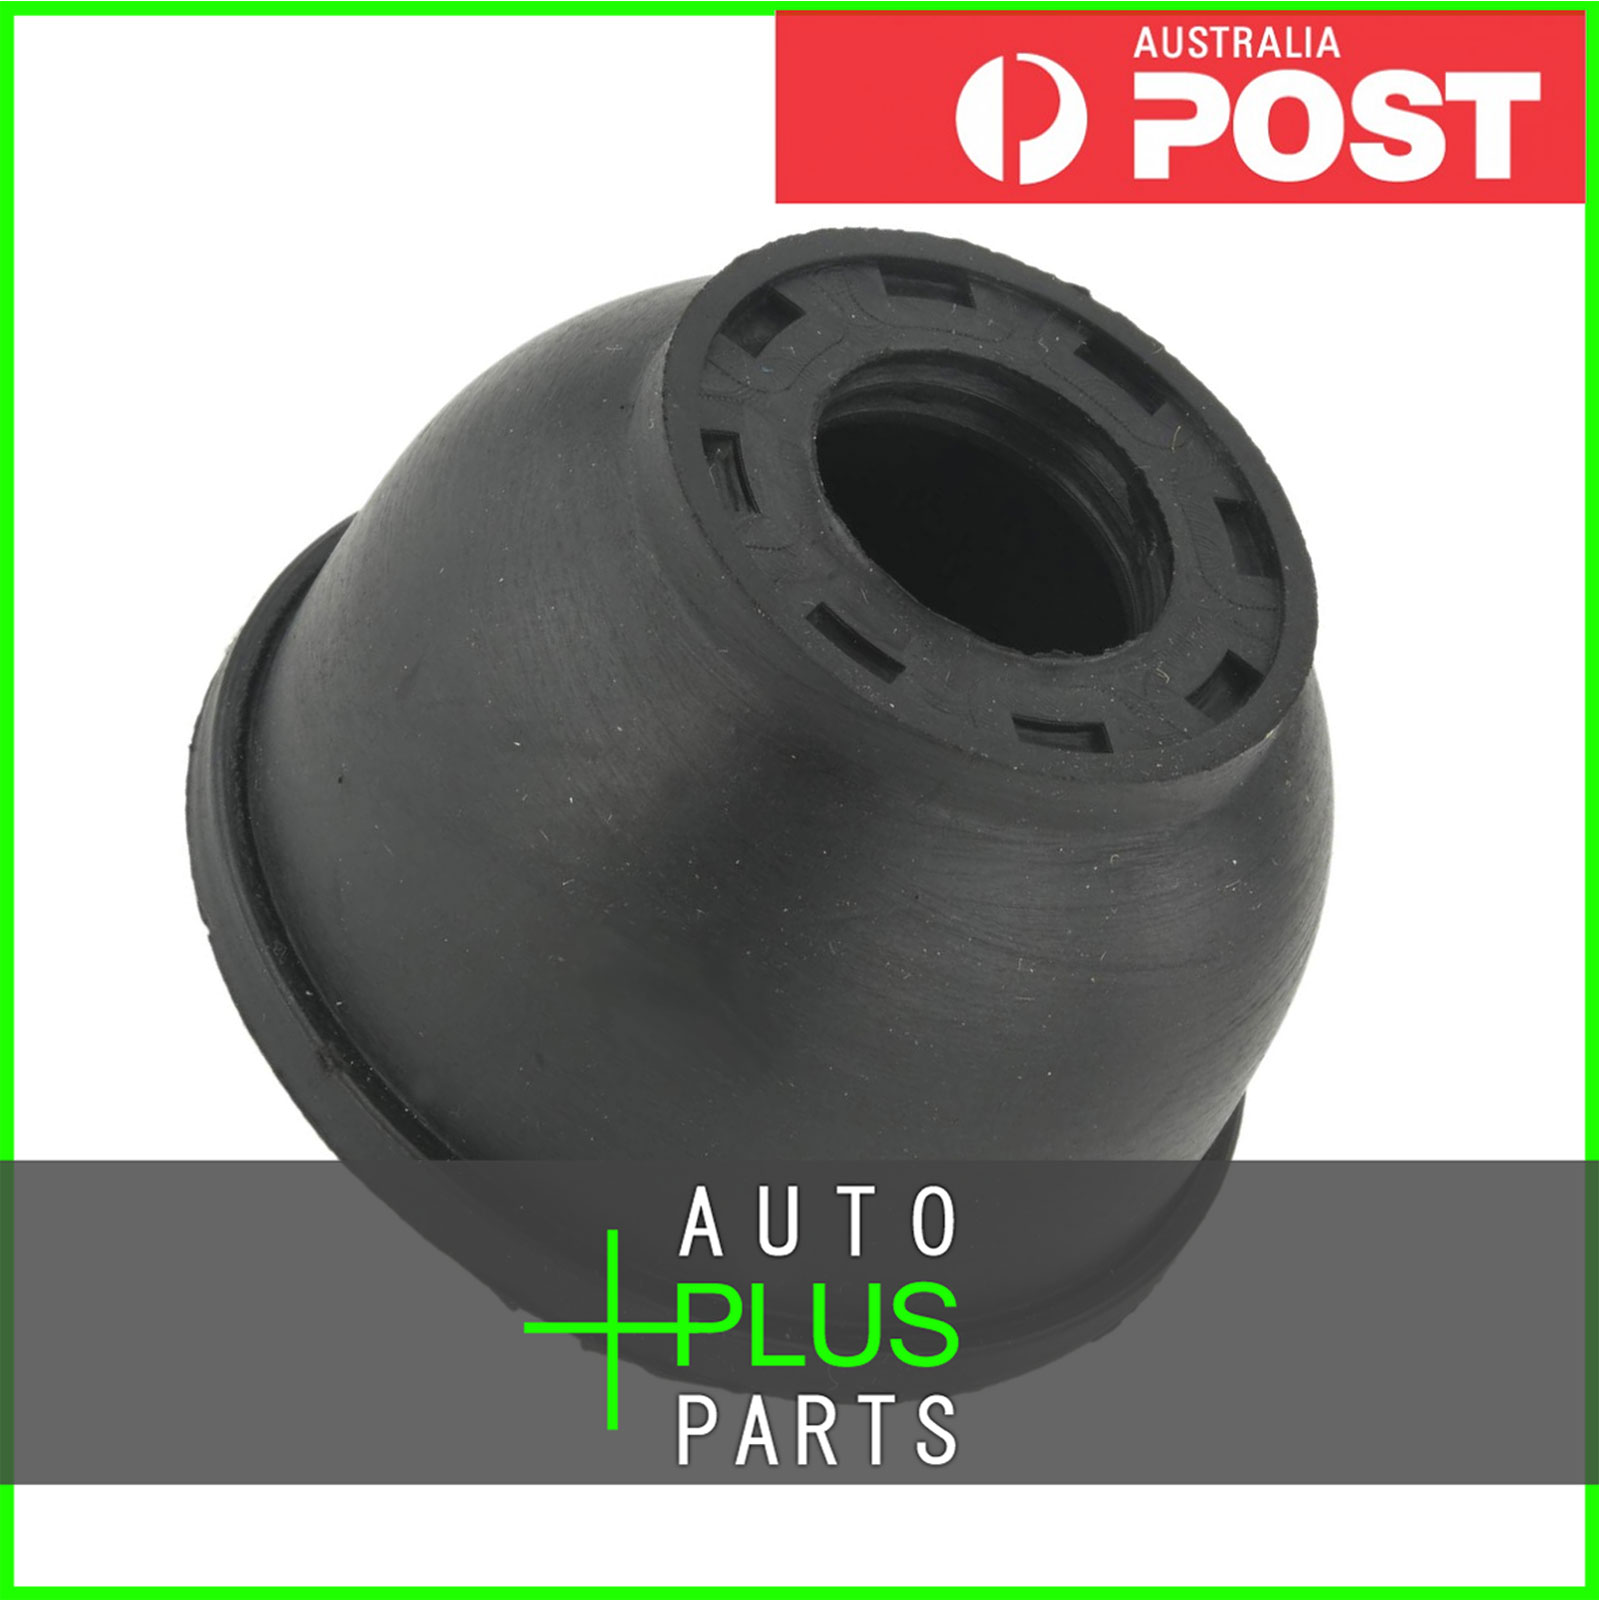 Fits INFINITI Q60/G COUPE CV36 REAR UPPER CONTROL ARM BALL JOINT BOOT 44.8X32X17 Product Photo